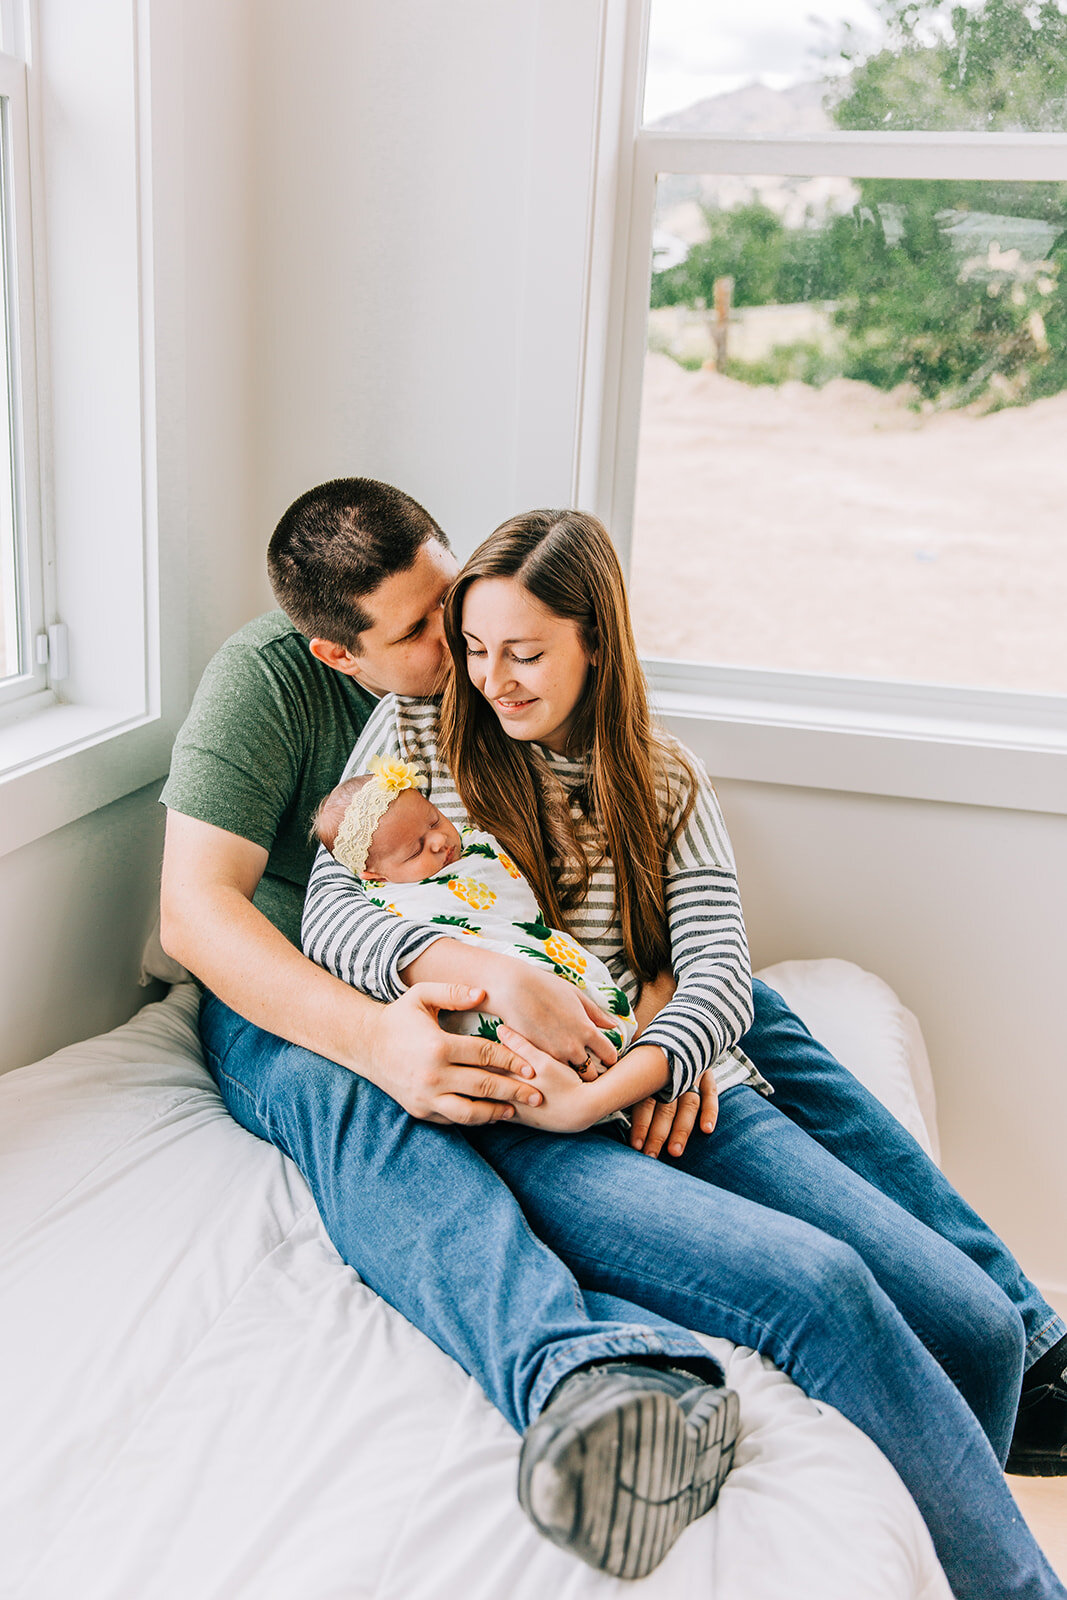  logan utah home photo shoot baby girl baby snuggles family pose inspiration fresh from heaven husband kissing wife holding baby casual posing inspiration professional photographers in cache valley family photographers in logan newborn photo shoot fa